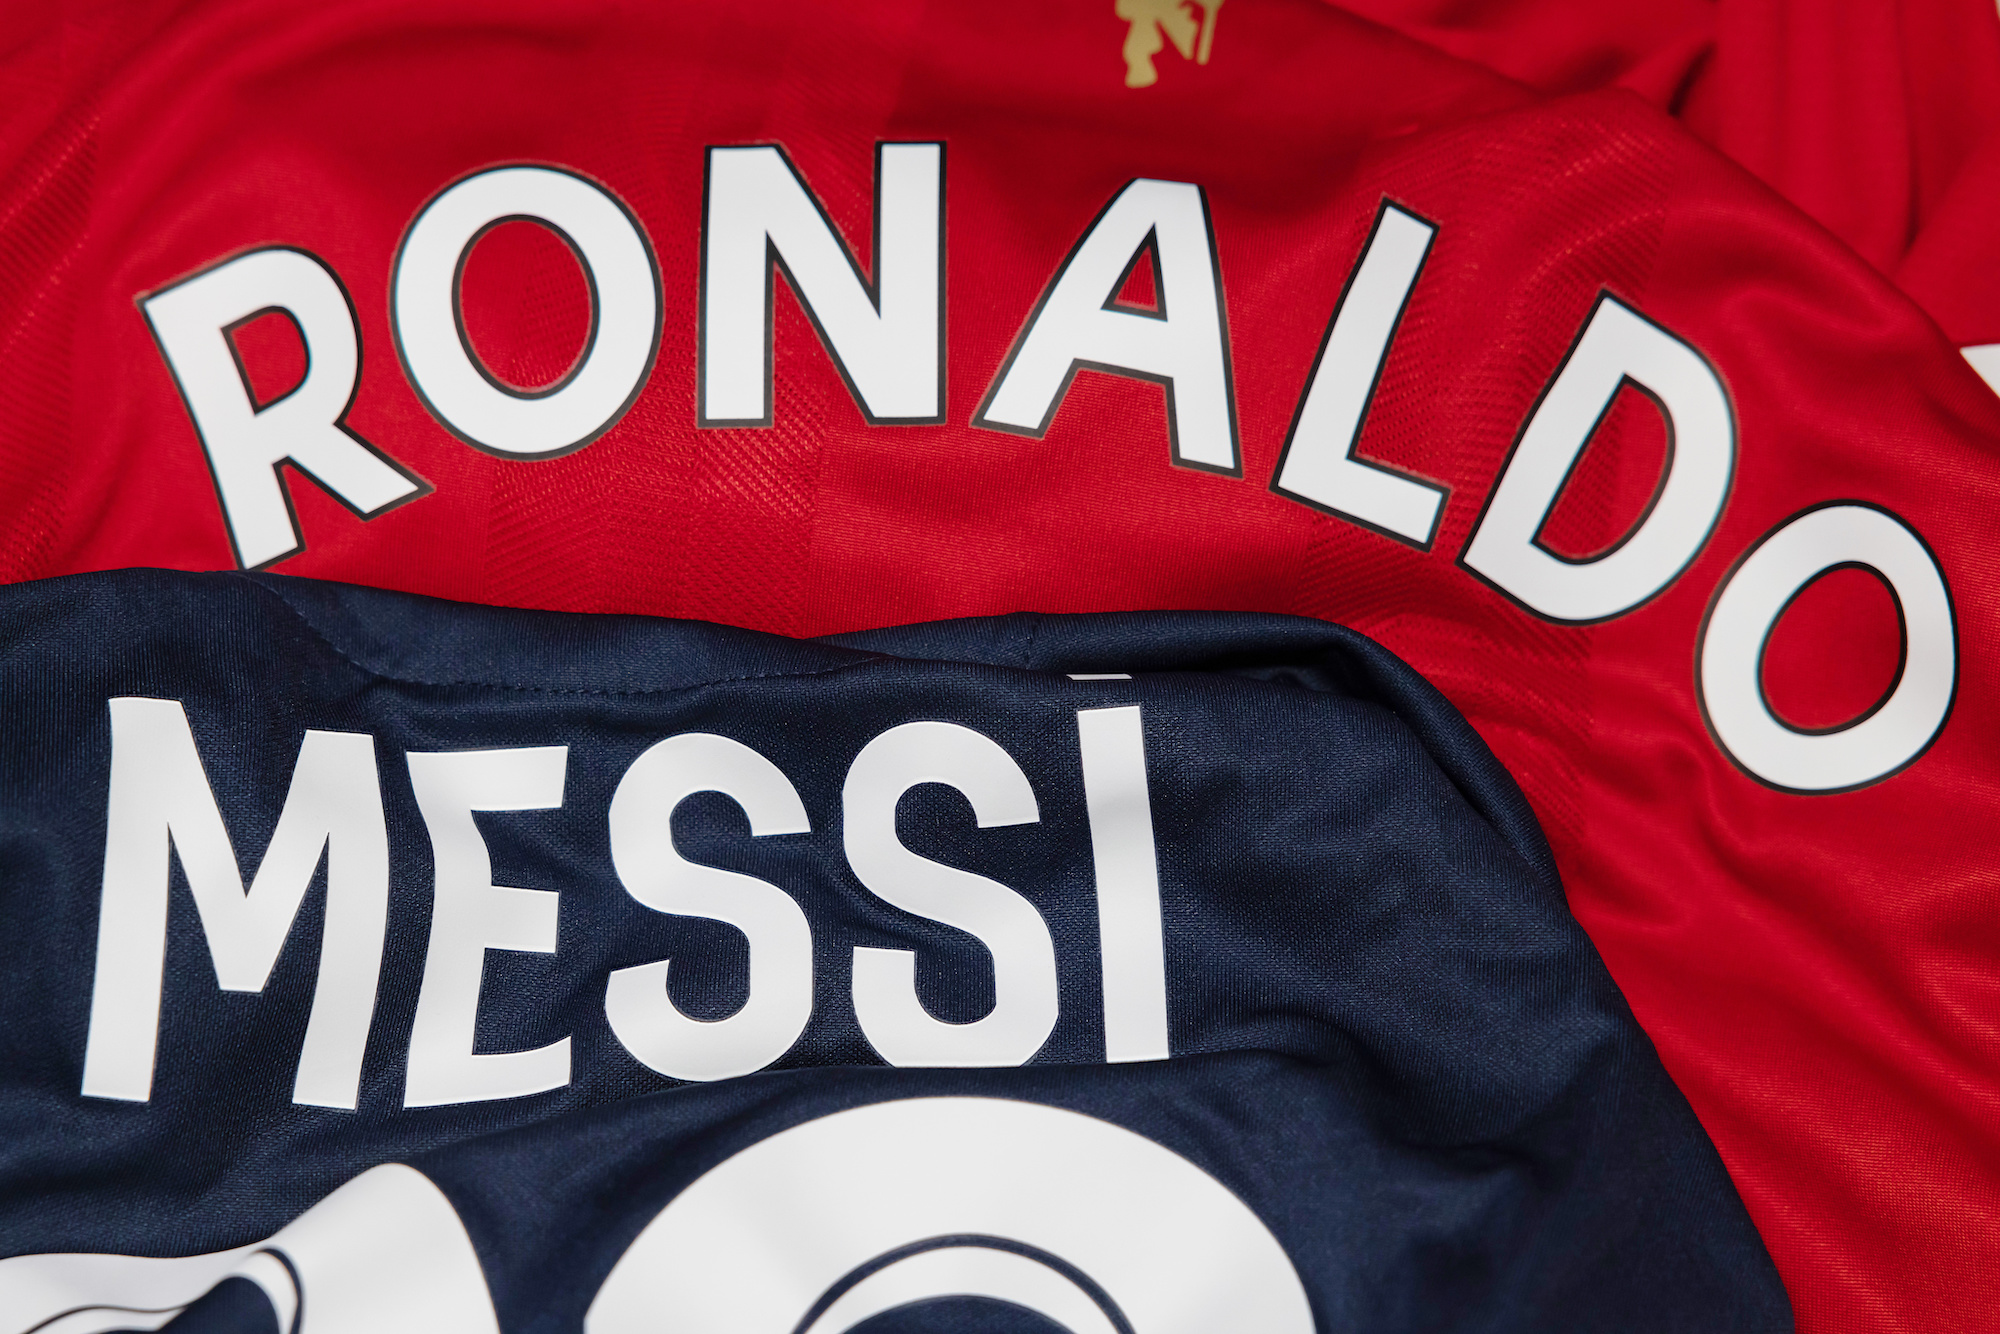 Cristiano Ronaldo and Messi Name on Manchester United and Paris Saint Germain Jersey